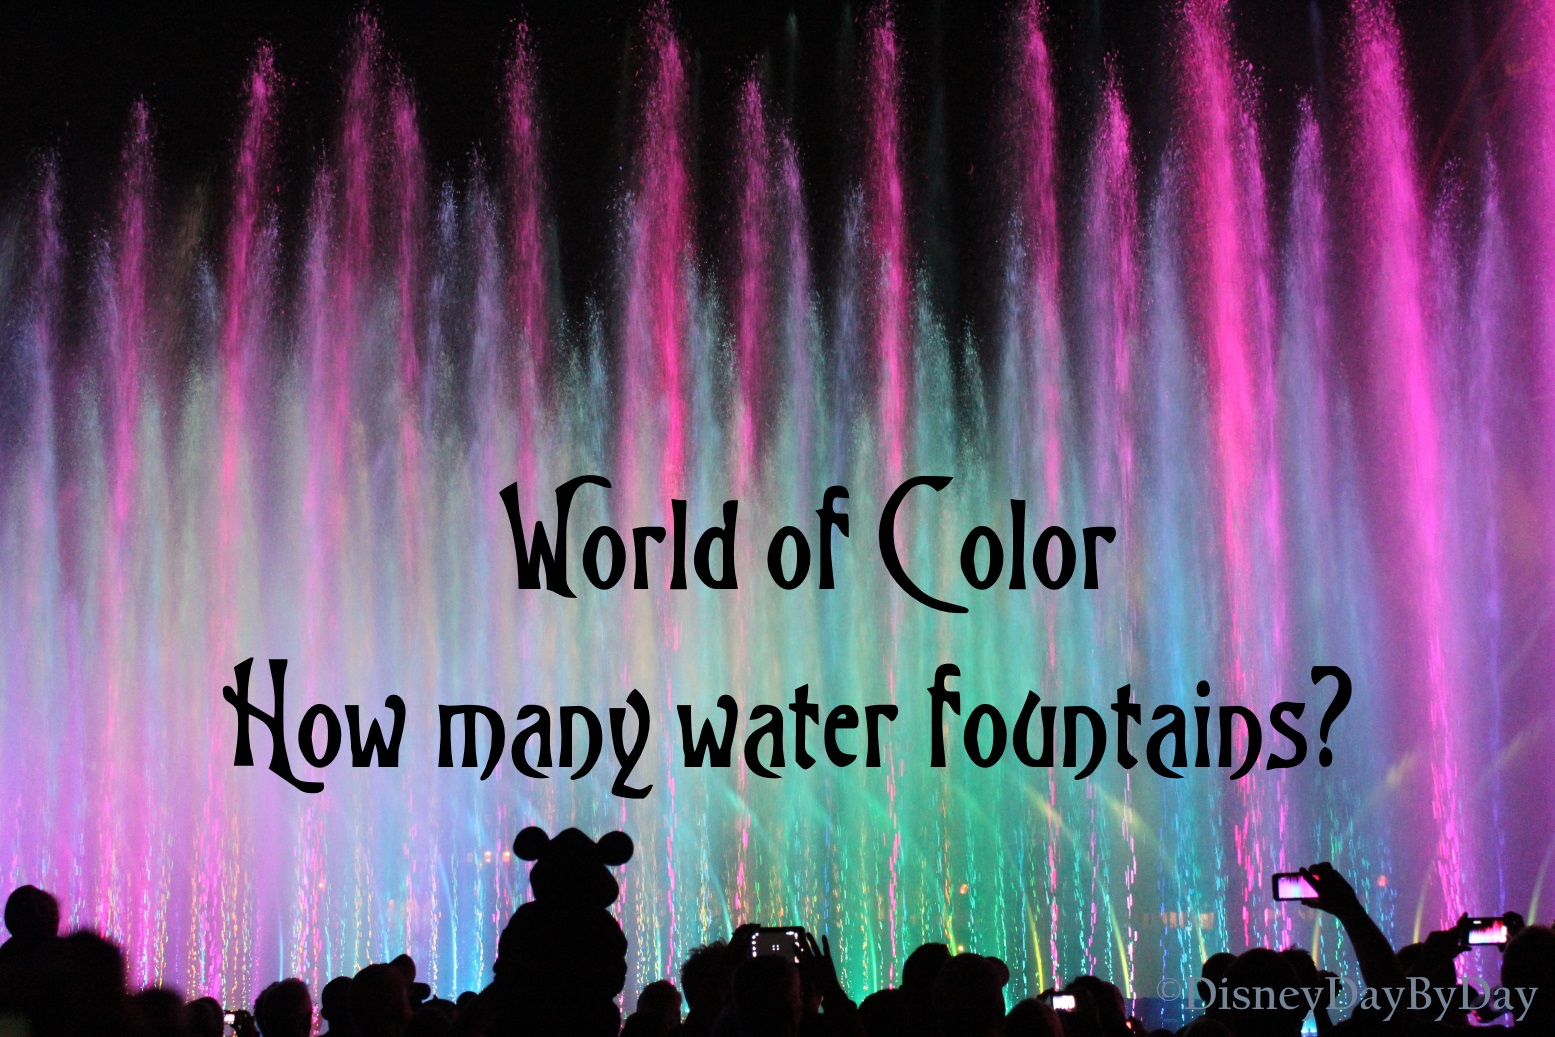 Disney Trivia – How many fountains in the World of Color?